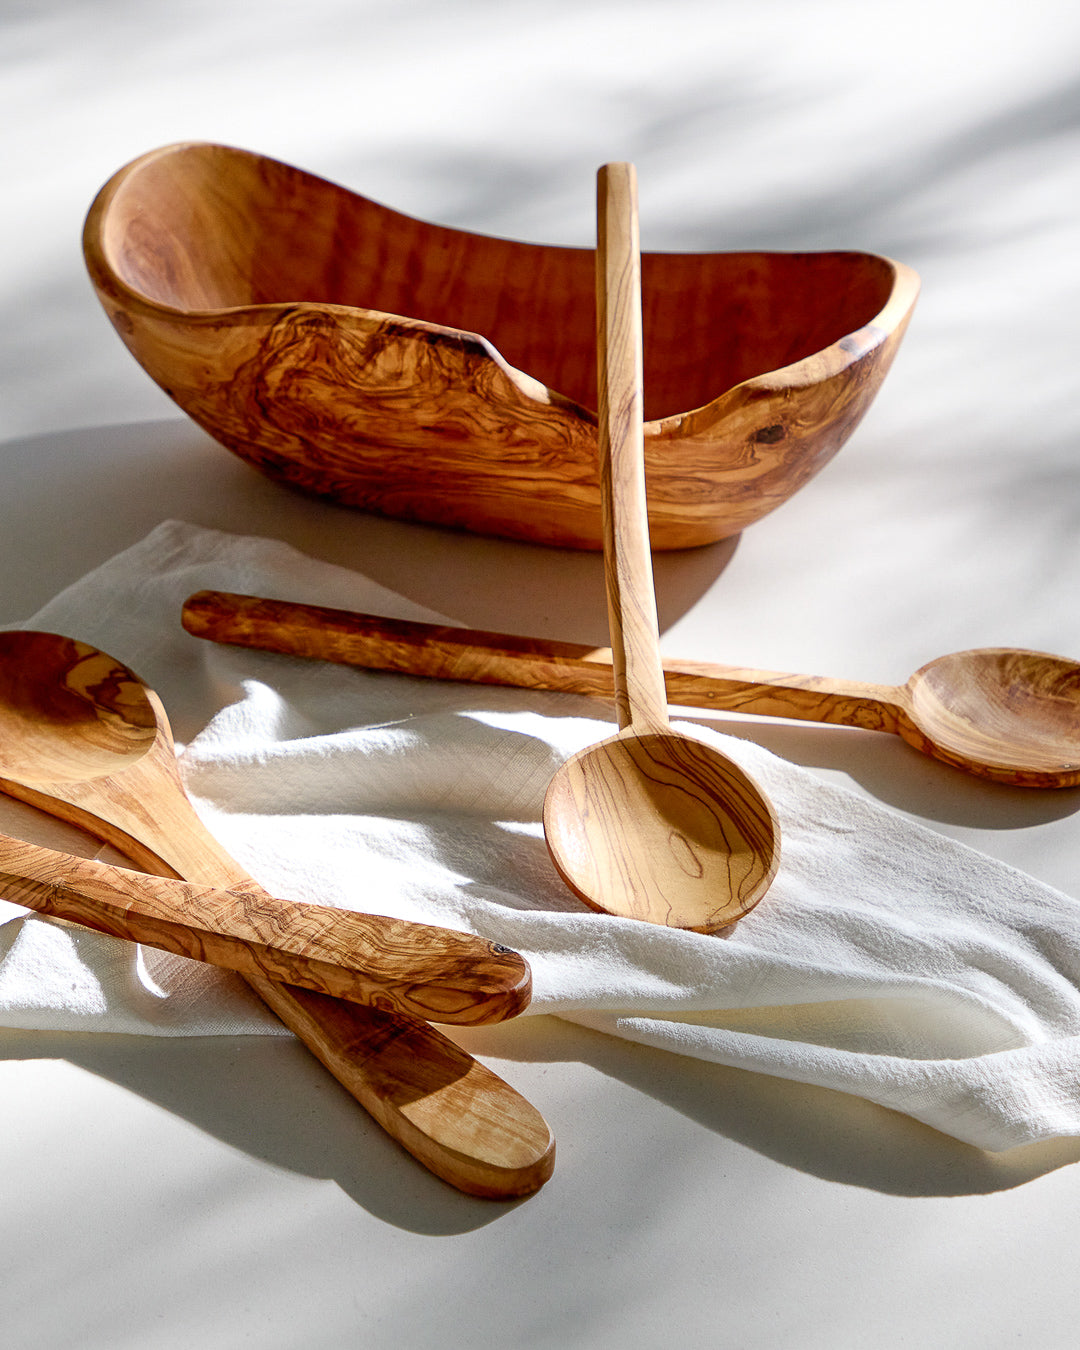 
                  
                    Olive wood serving ware with linen napkin. Premium serving bowl and spoons made by hand.
                  
                